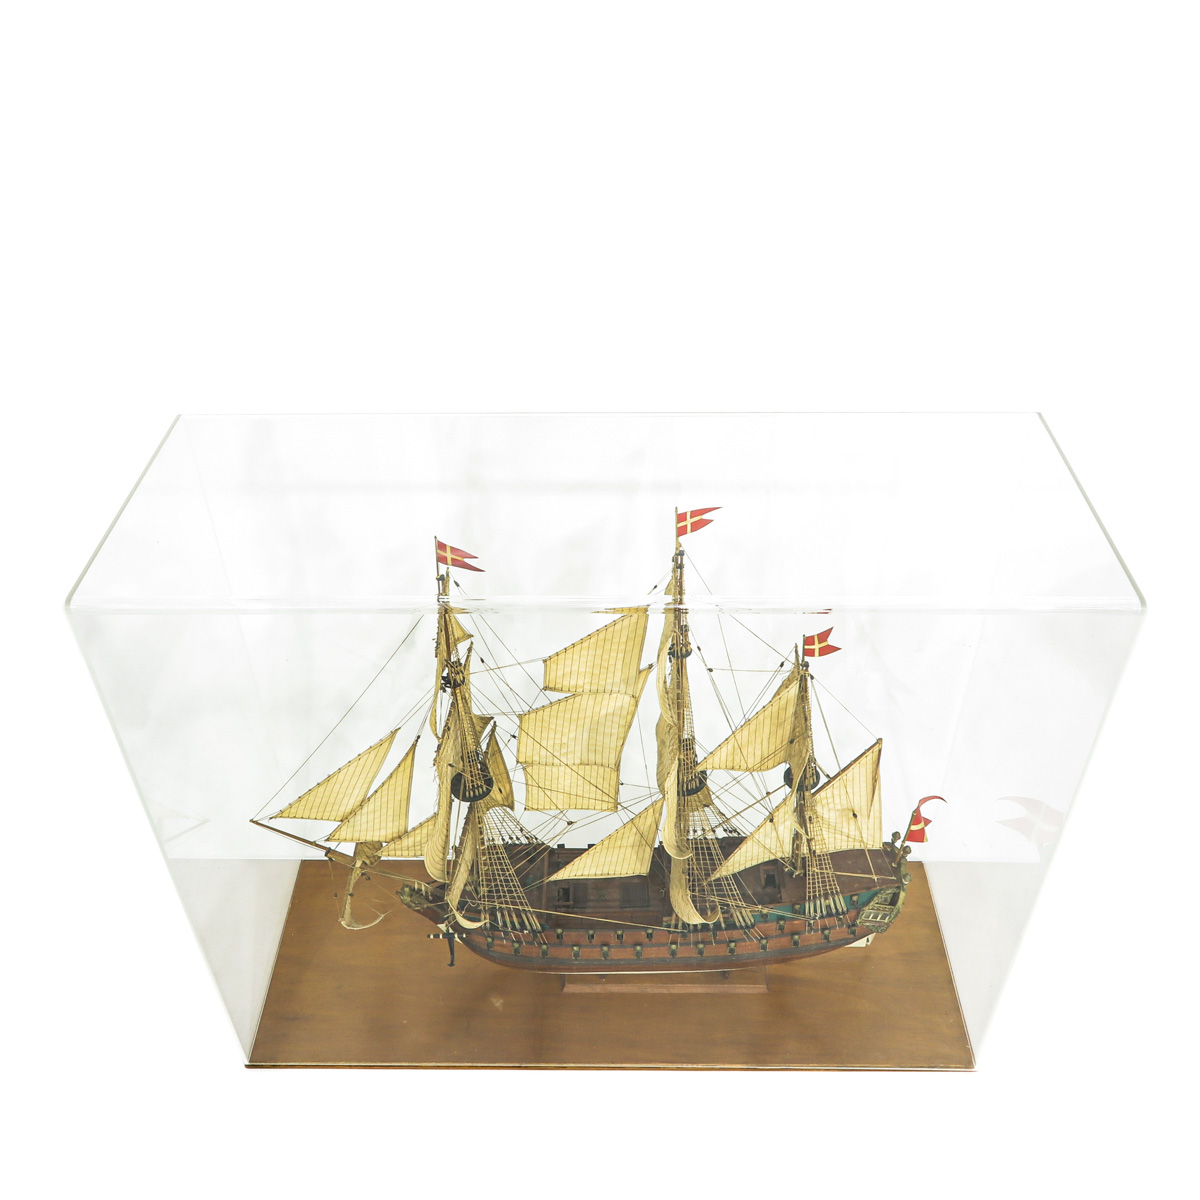 A Model Ship - Image 5 of 10